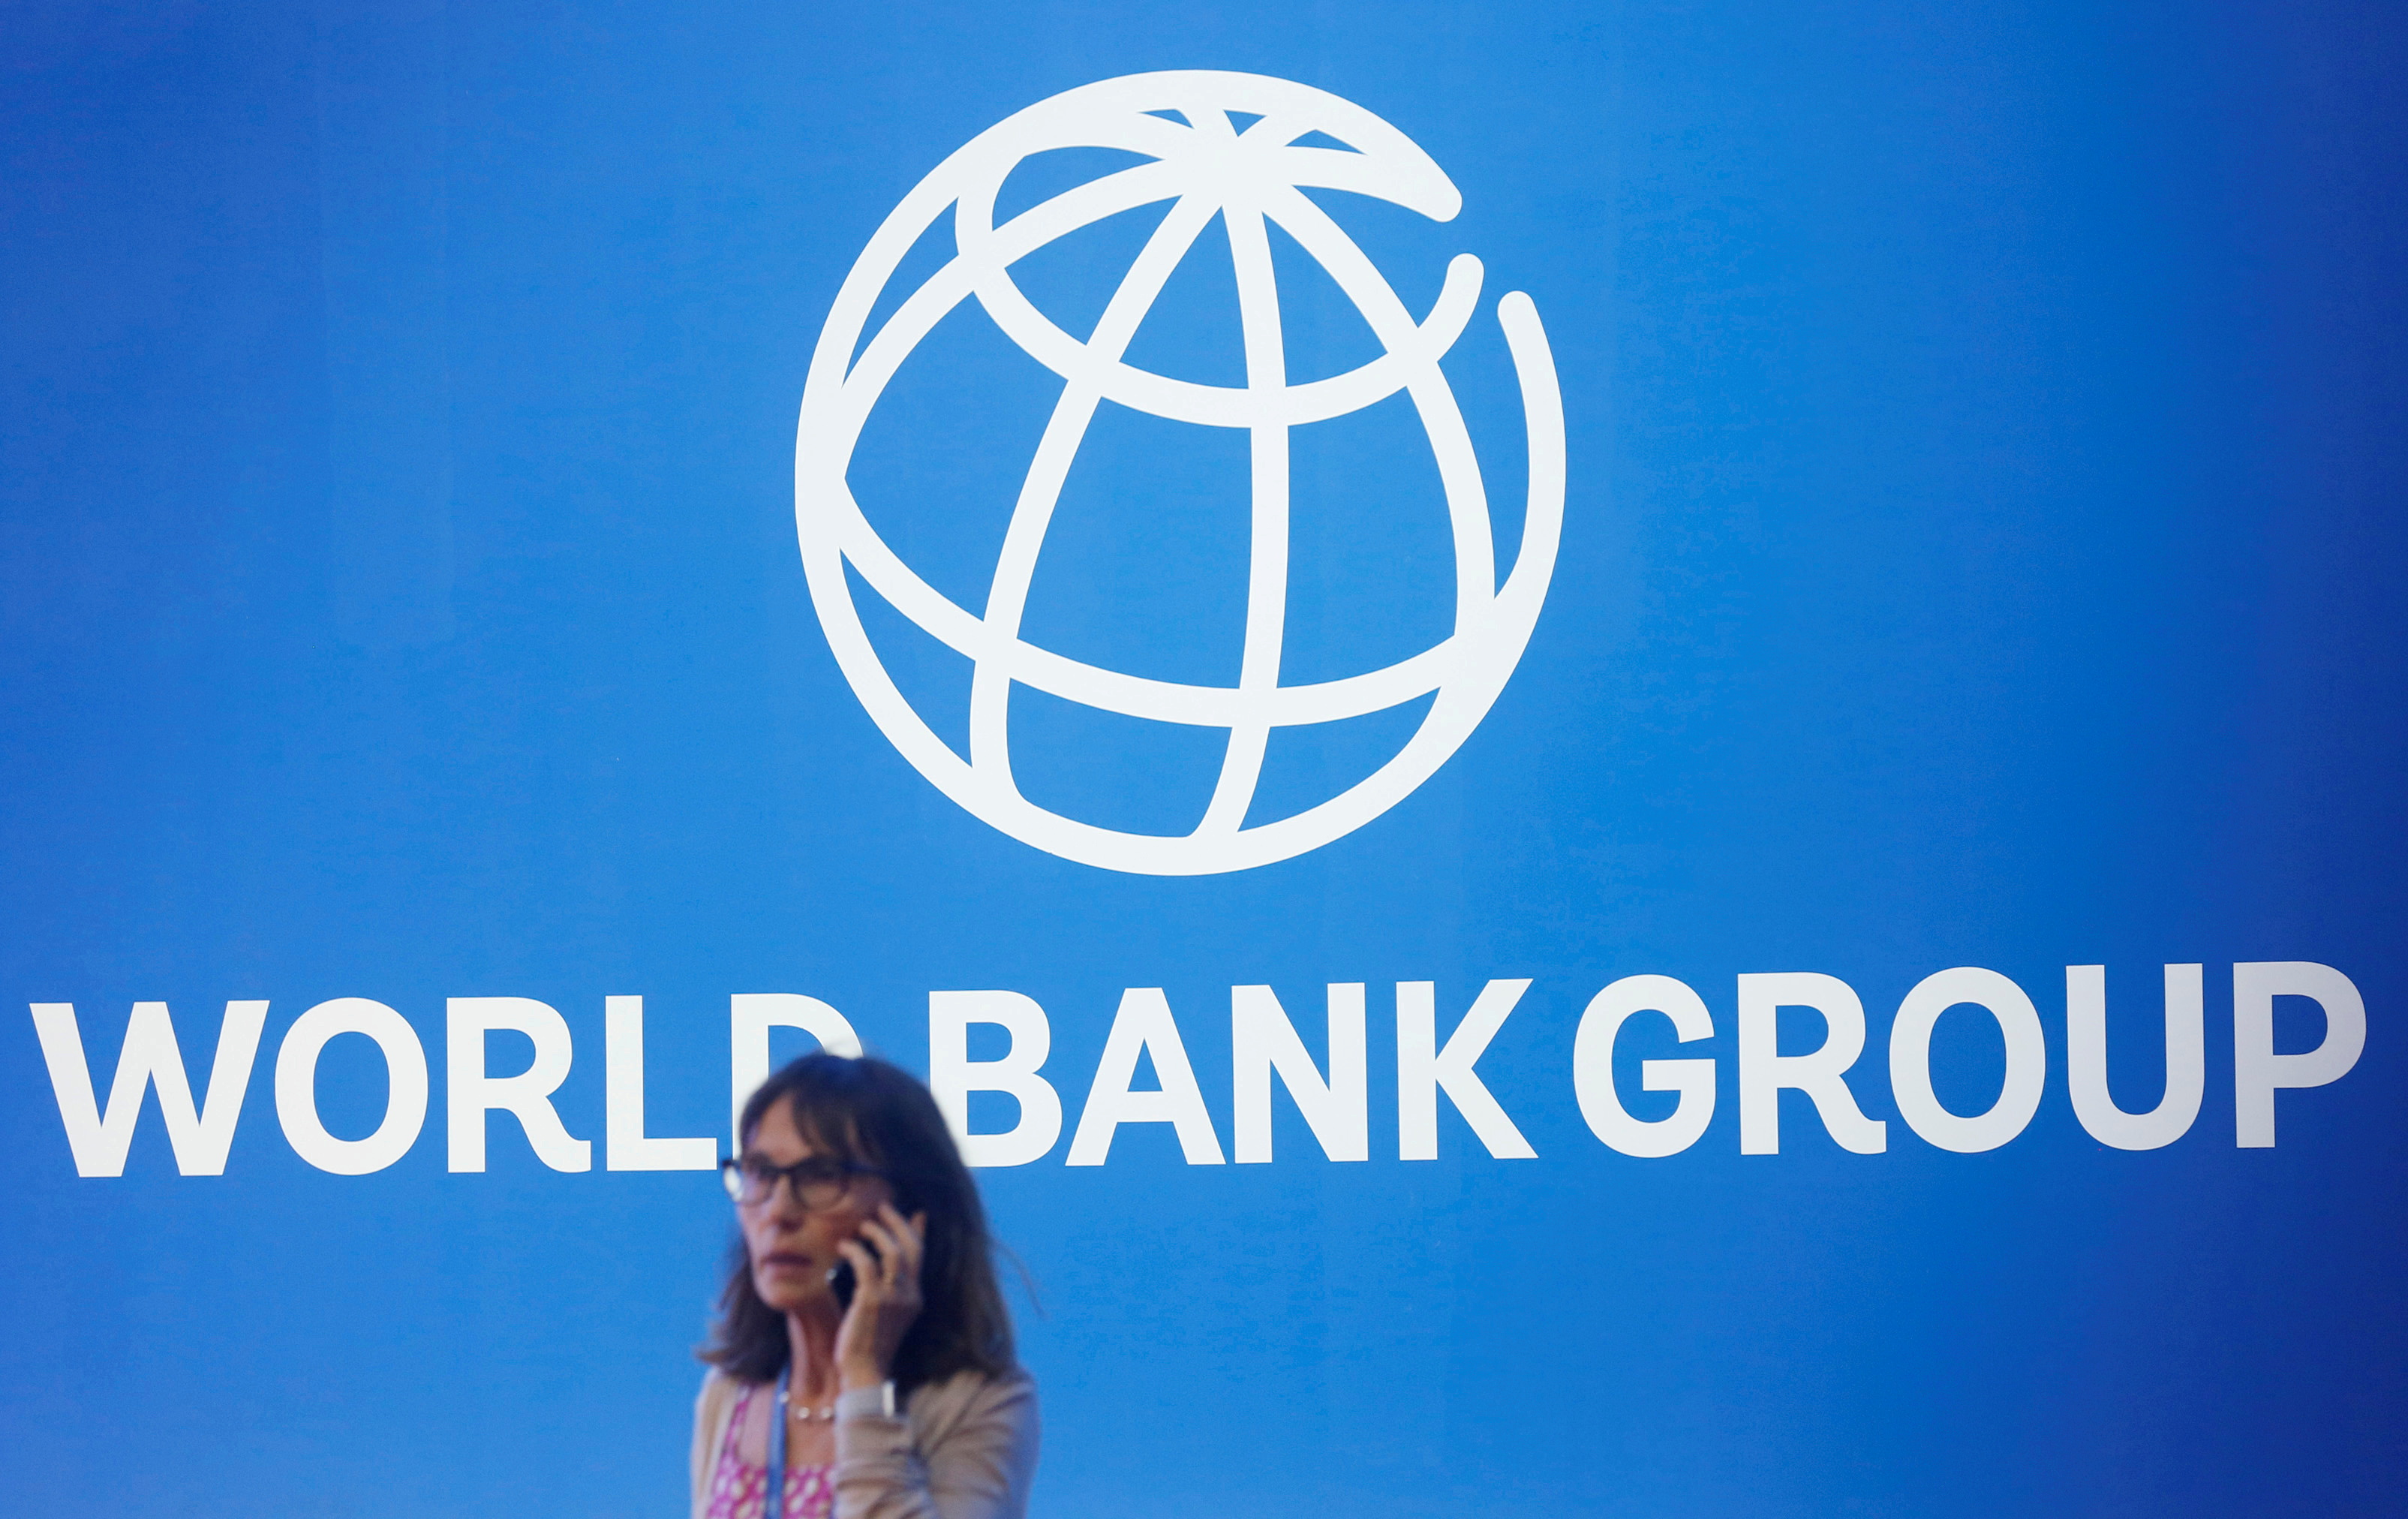 A participant stands near a logo of World Bank at the International Monetary Fund - World Bank Annual Meeting 2018 in Nusa Dua, Bali, Indonesia, October 12, 2018. REUTERS/Johannes P. Christo/File Photo